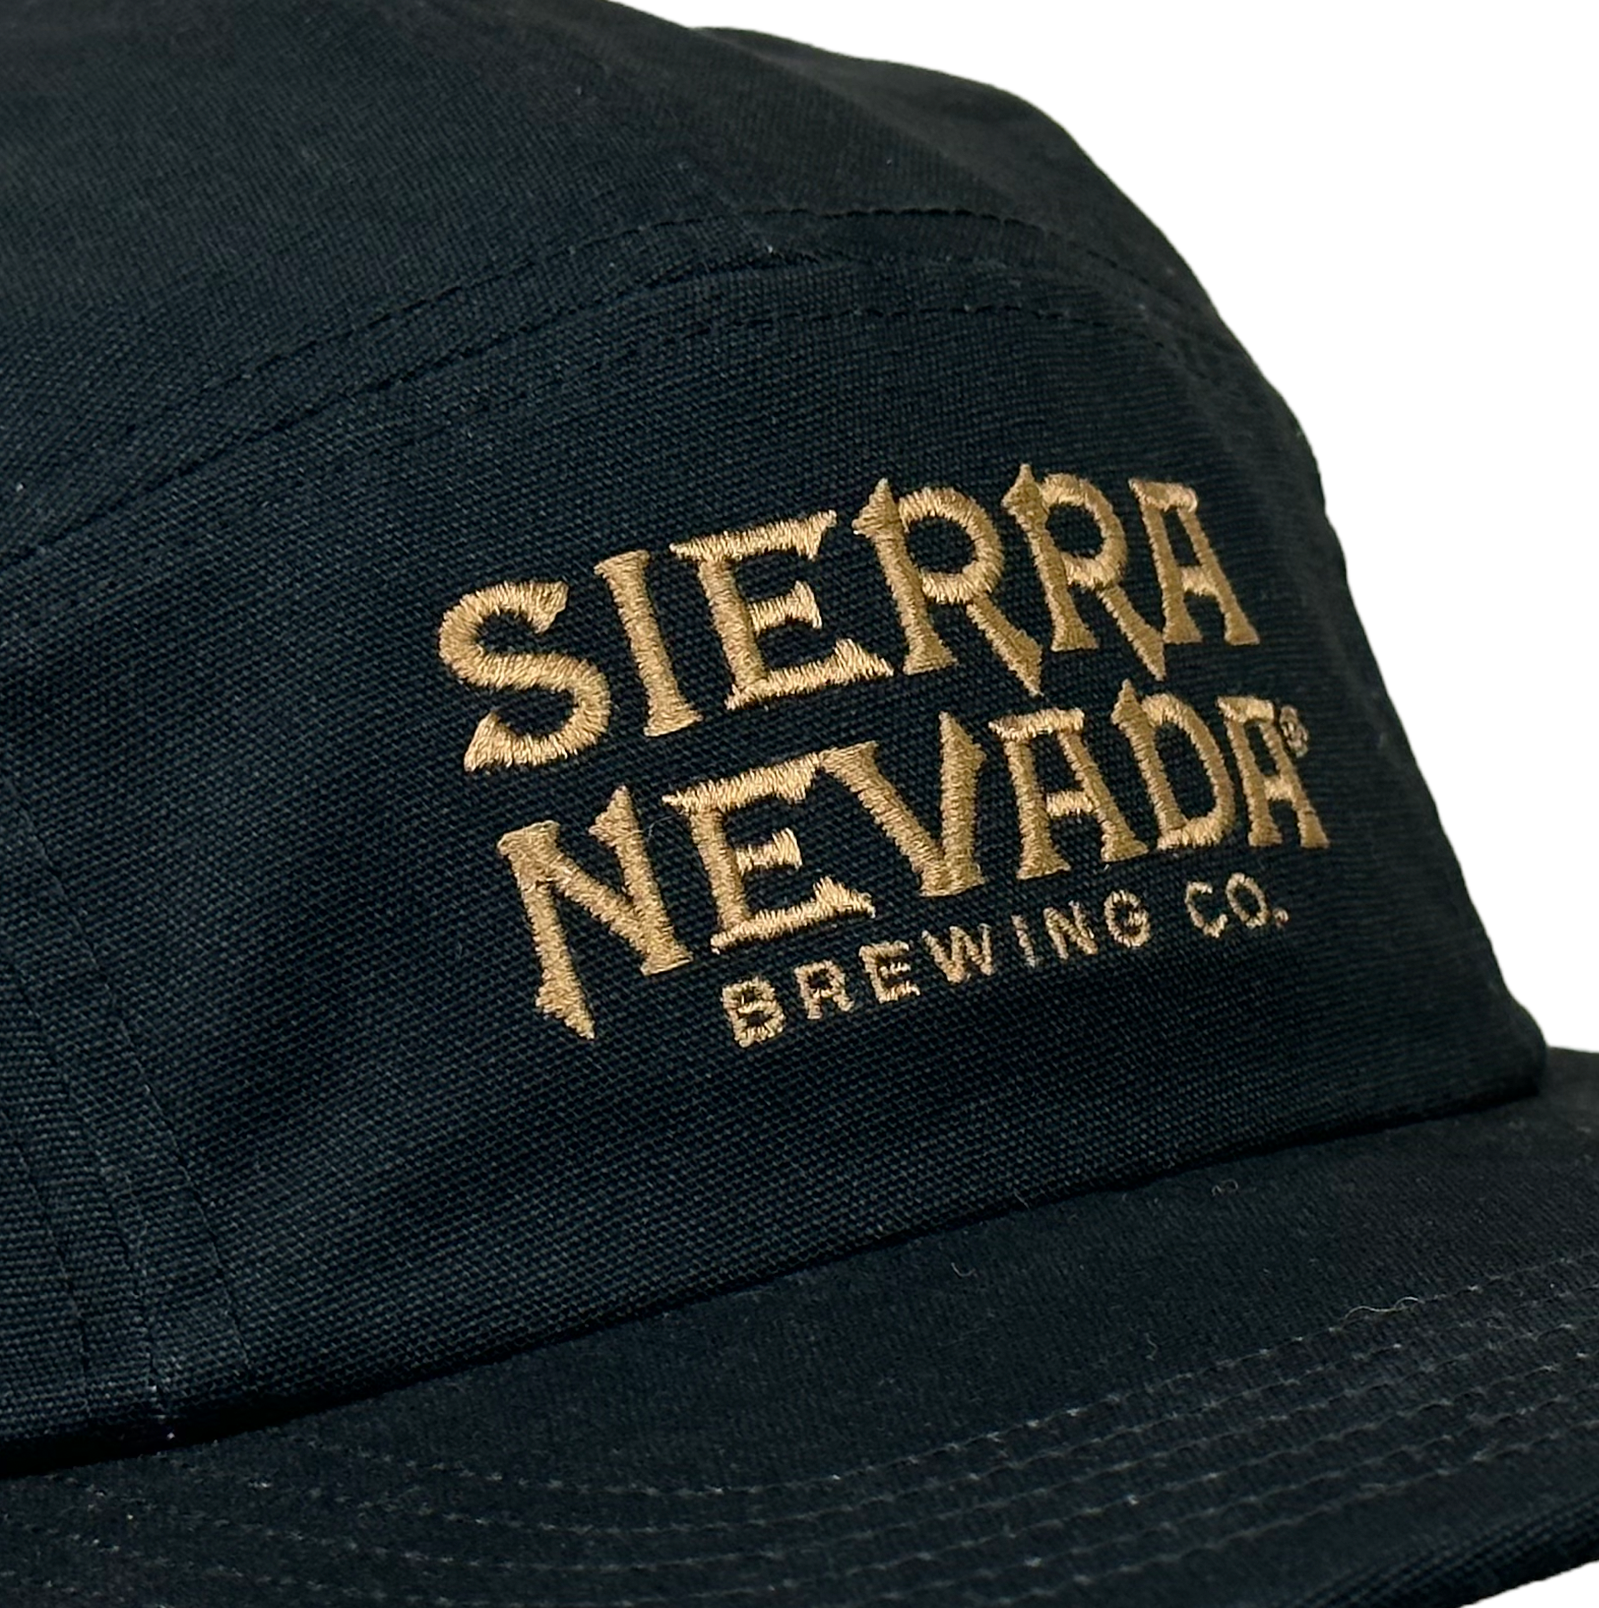 Sierra Nevada Camper Hat - close-up view of embroidered Sierra Nevada text on the front of the hat